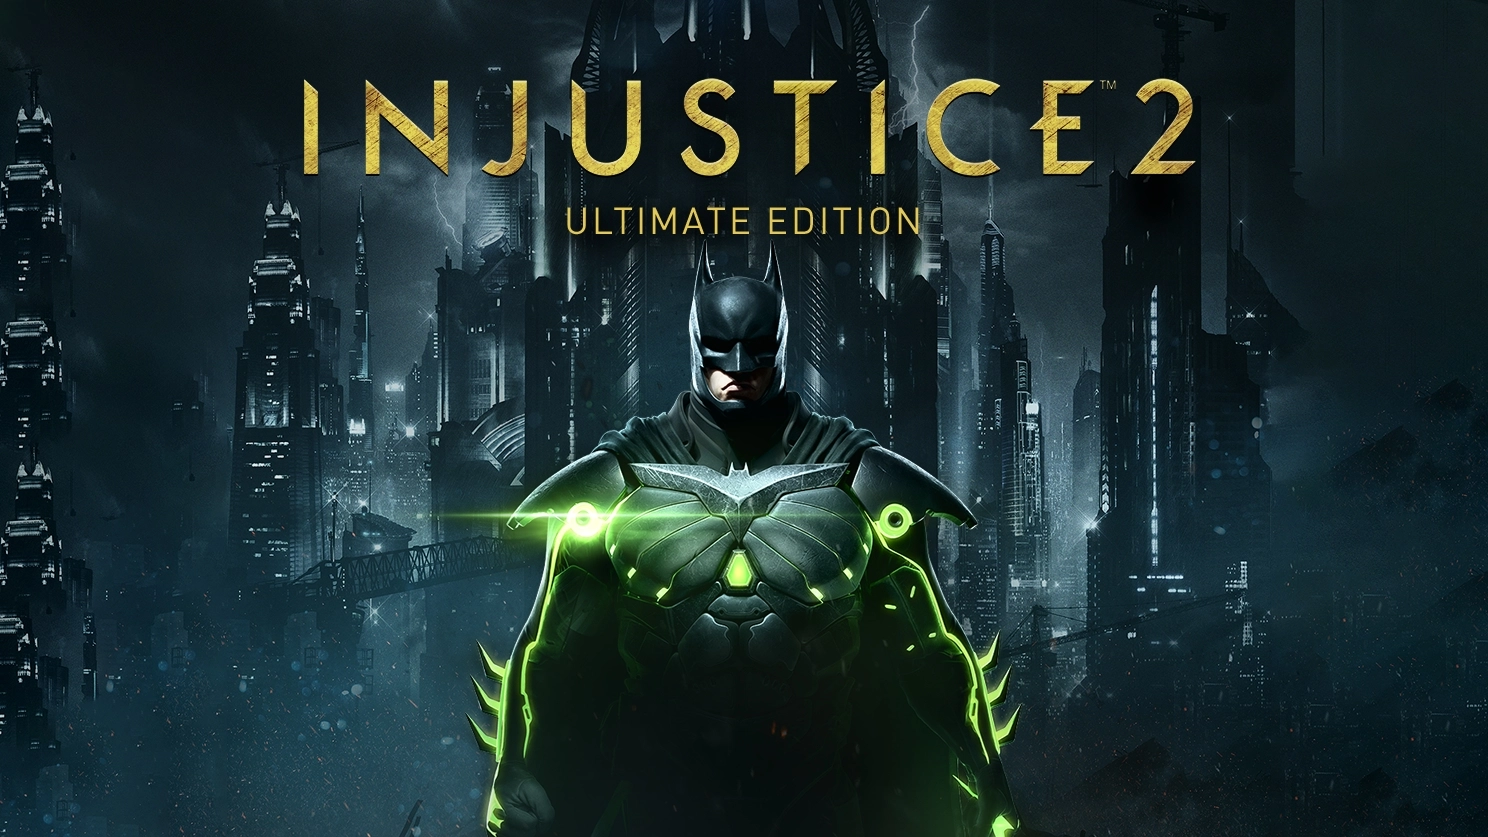 injustice 2 ultimate edition ultimate edition pc game steam cover